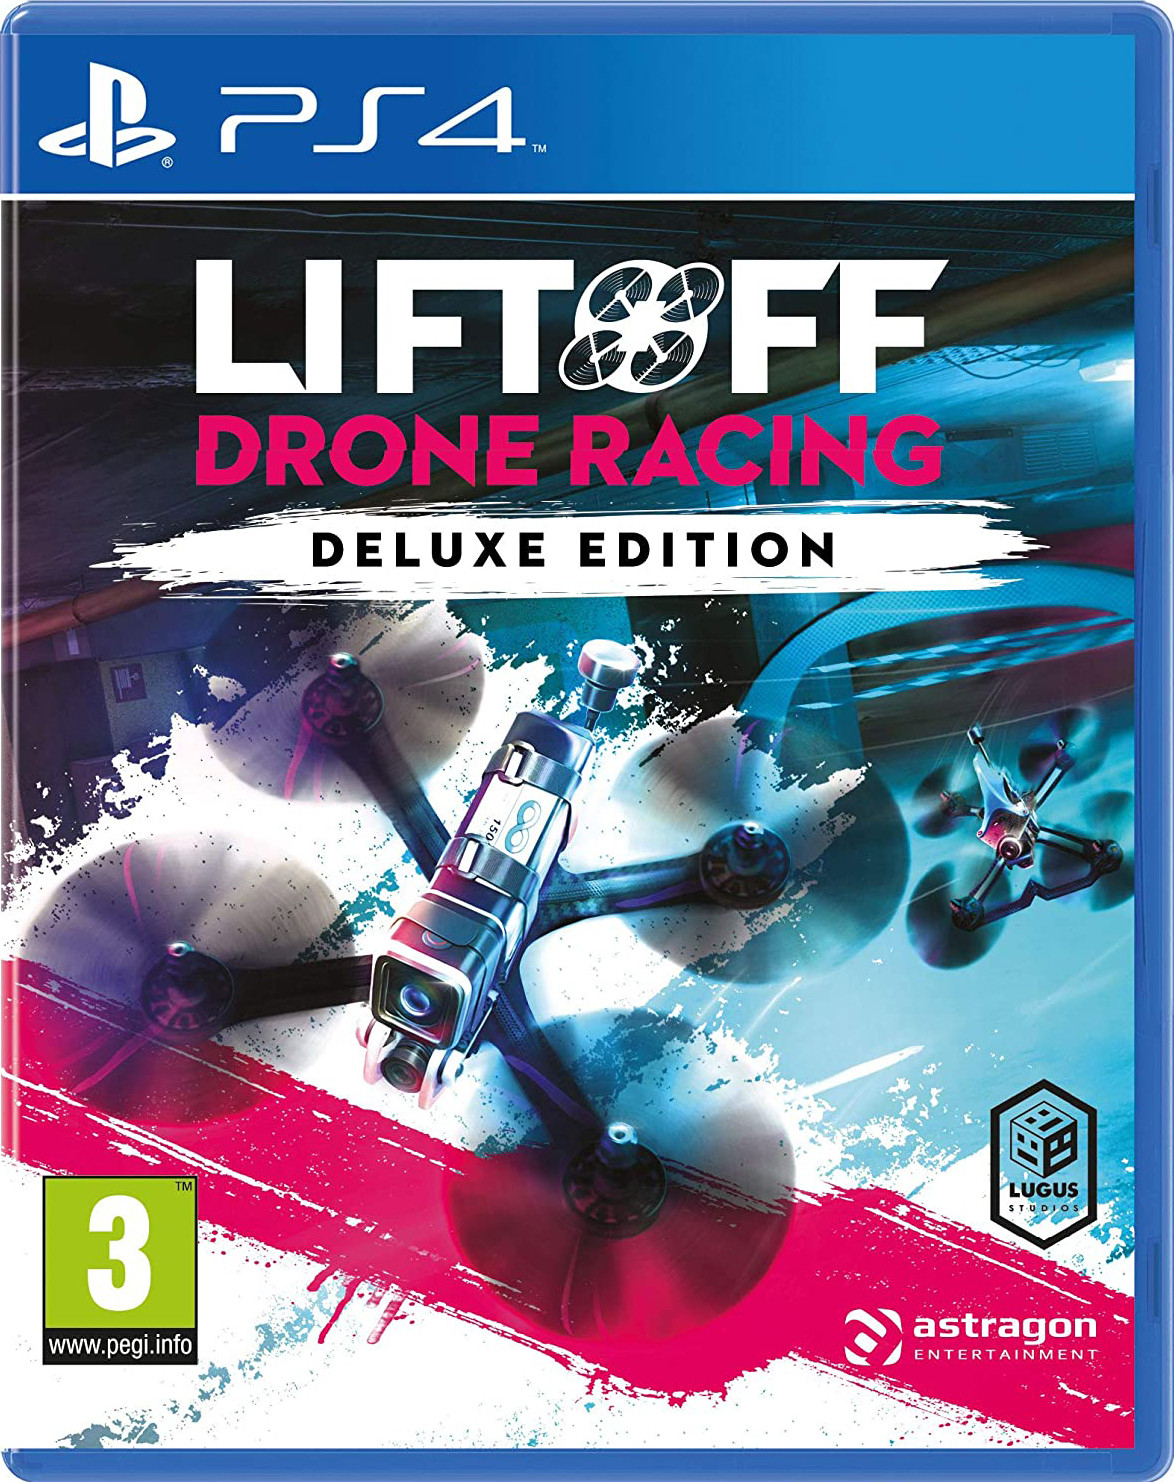 Liftoff Drone Racind Deluxe Edition